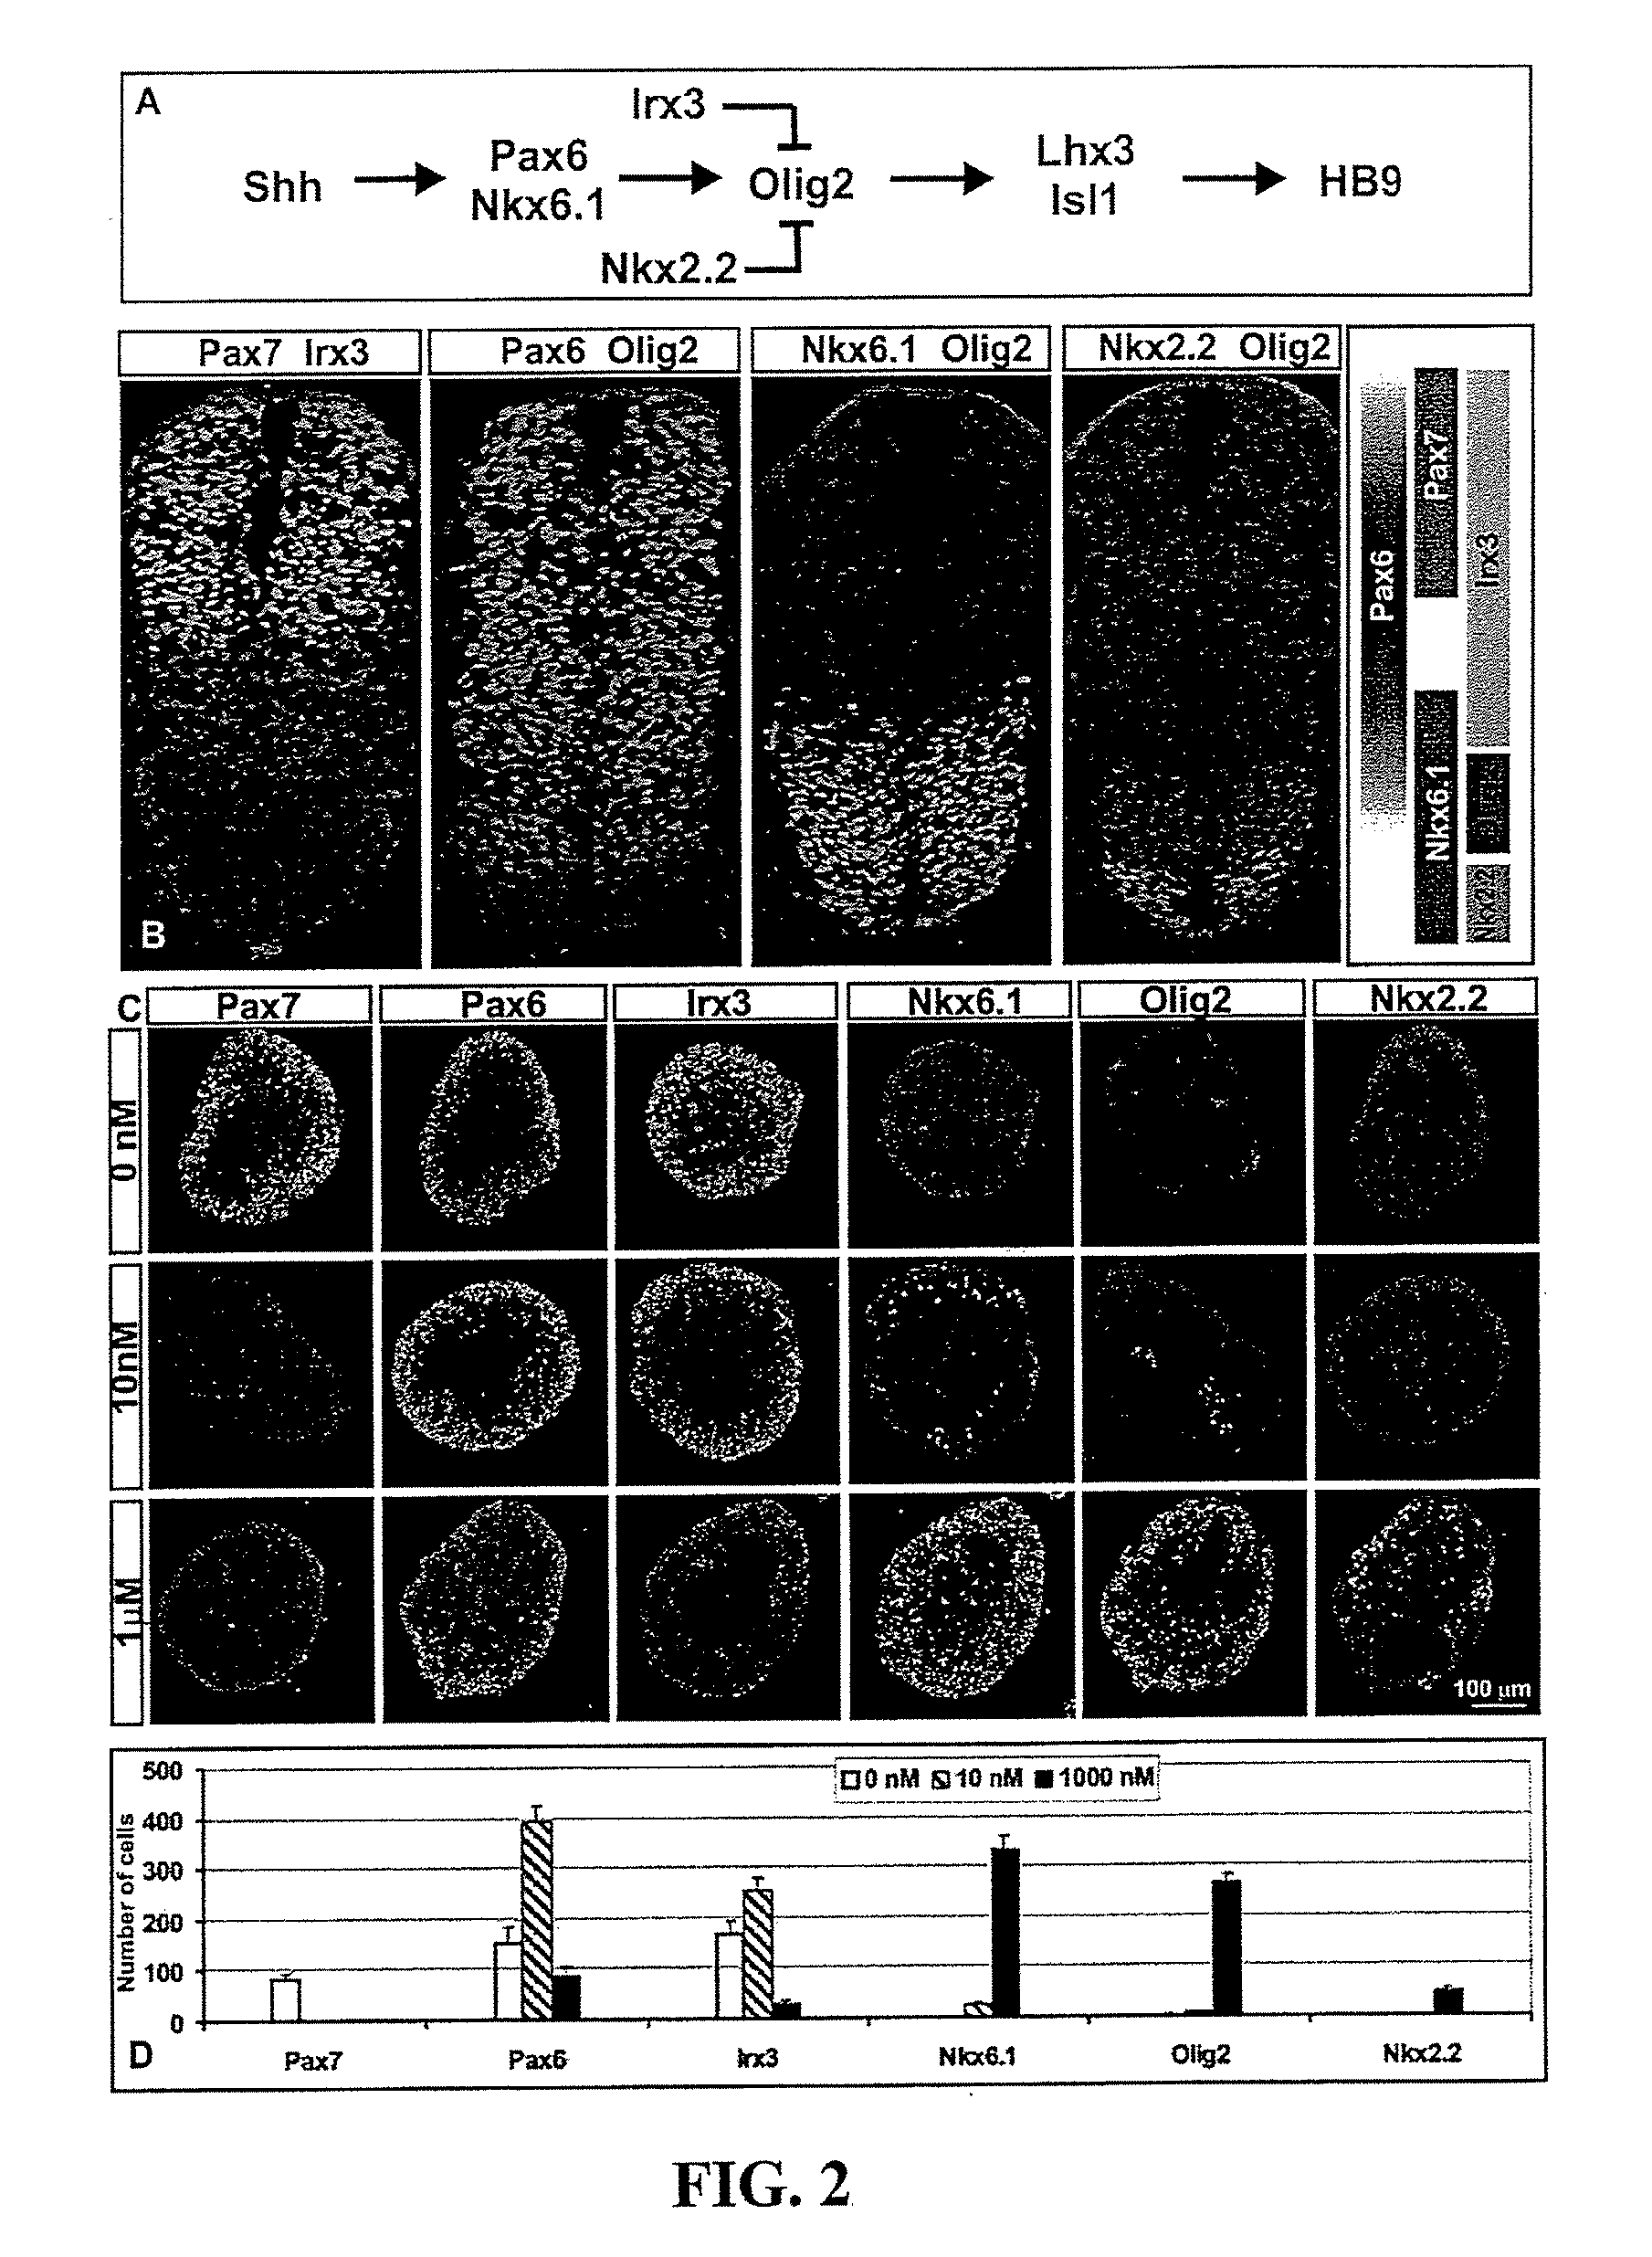 Systems and methods for screening for modulators of neural differentiation